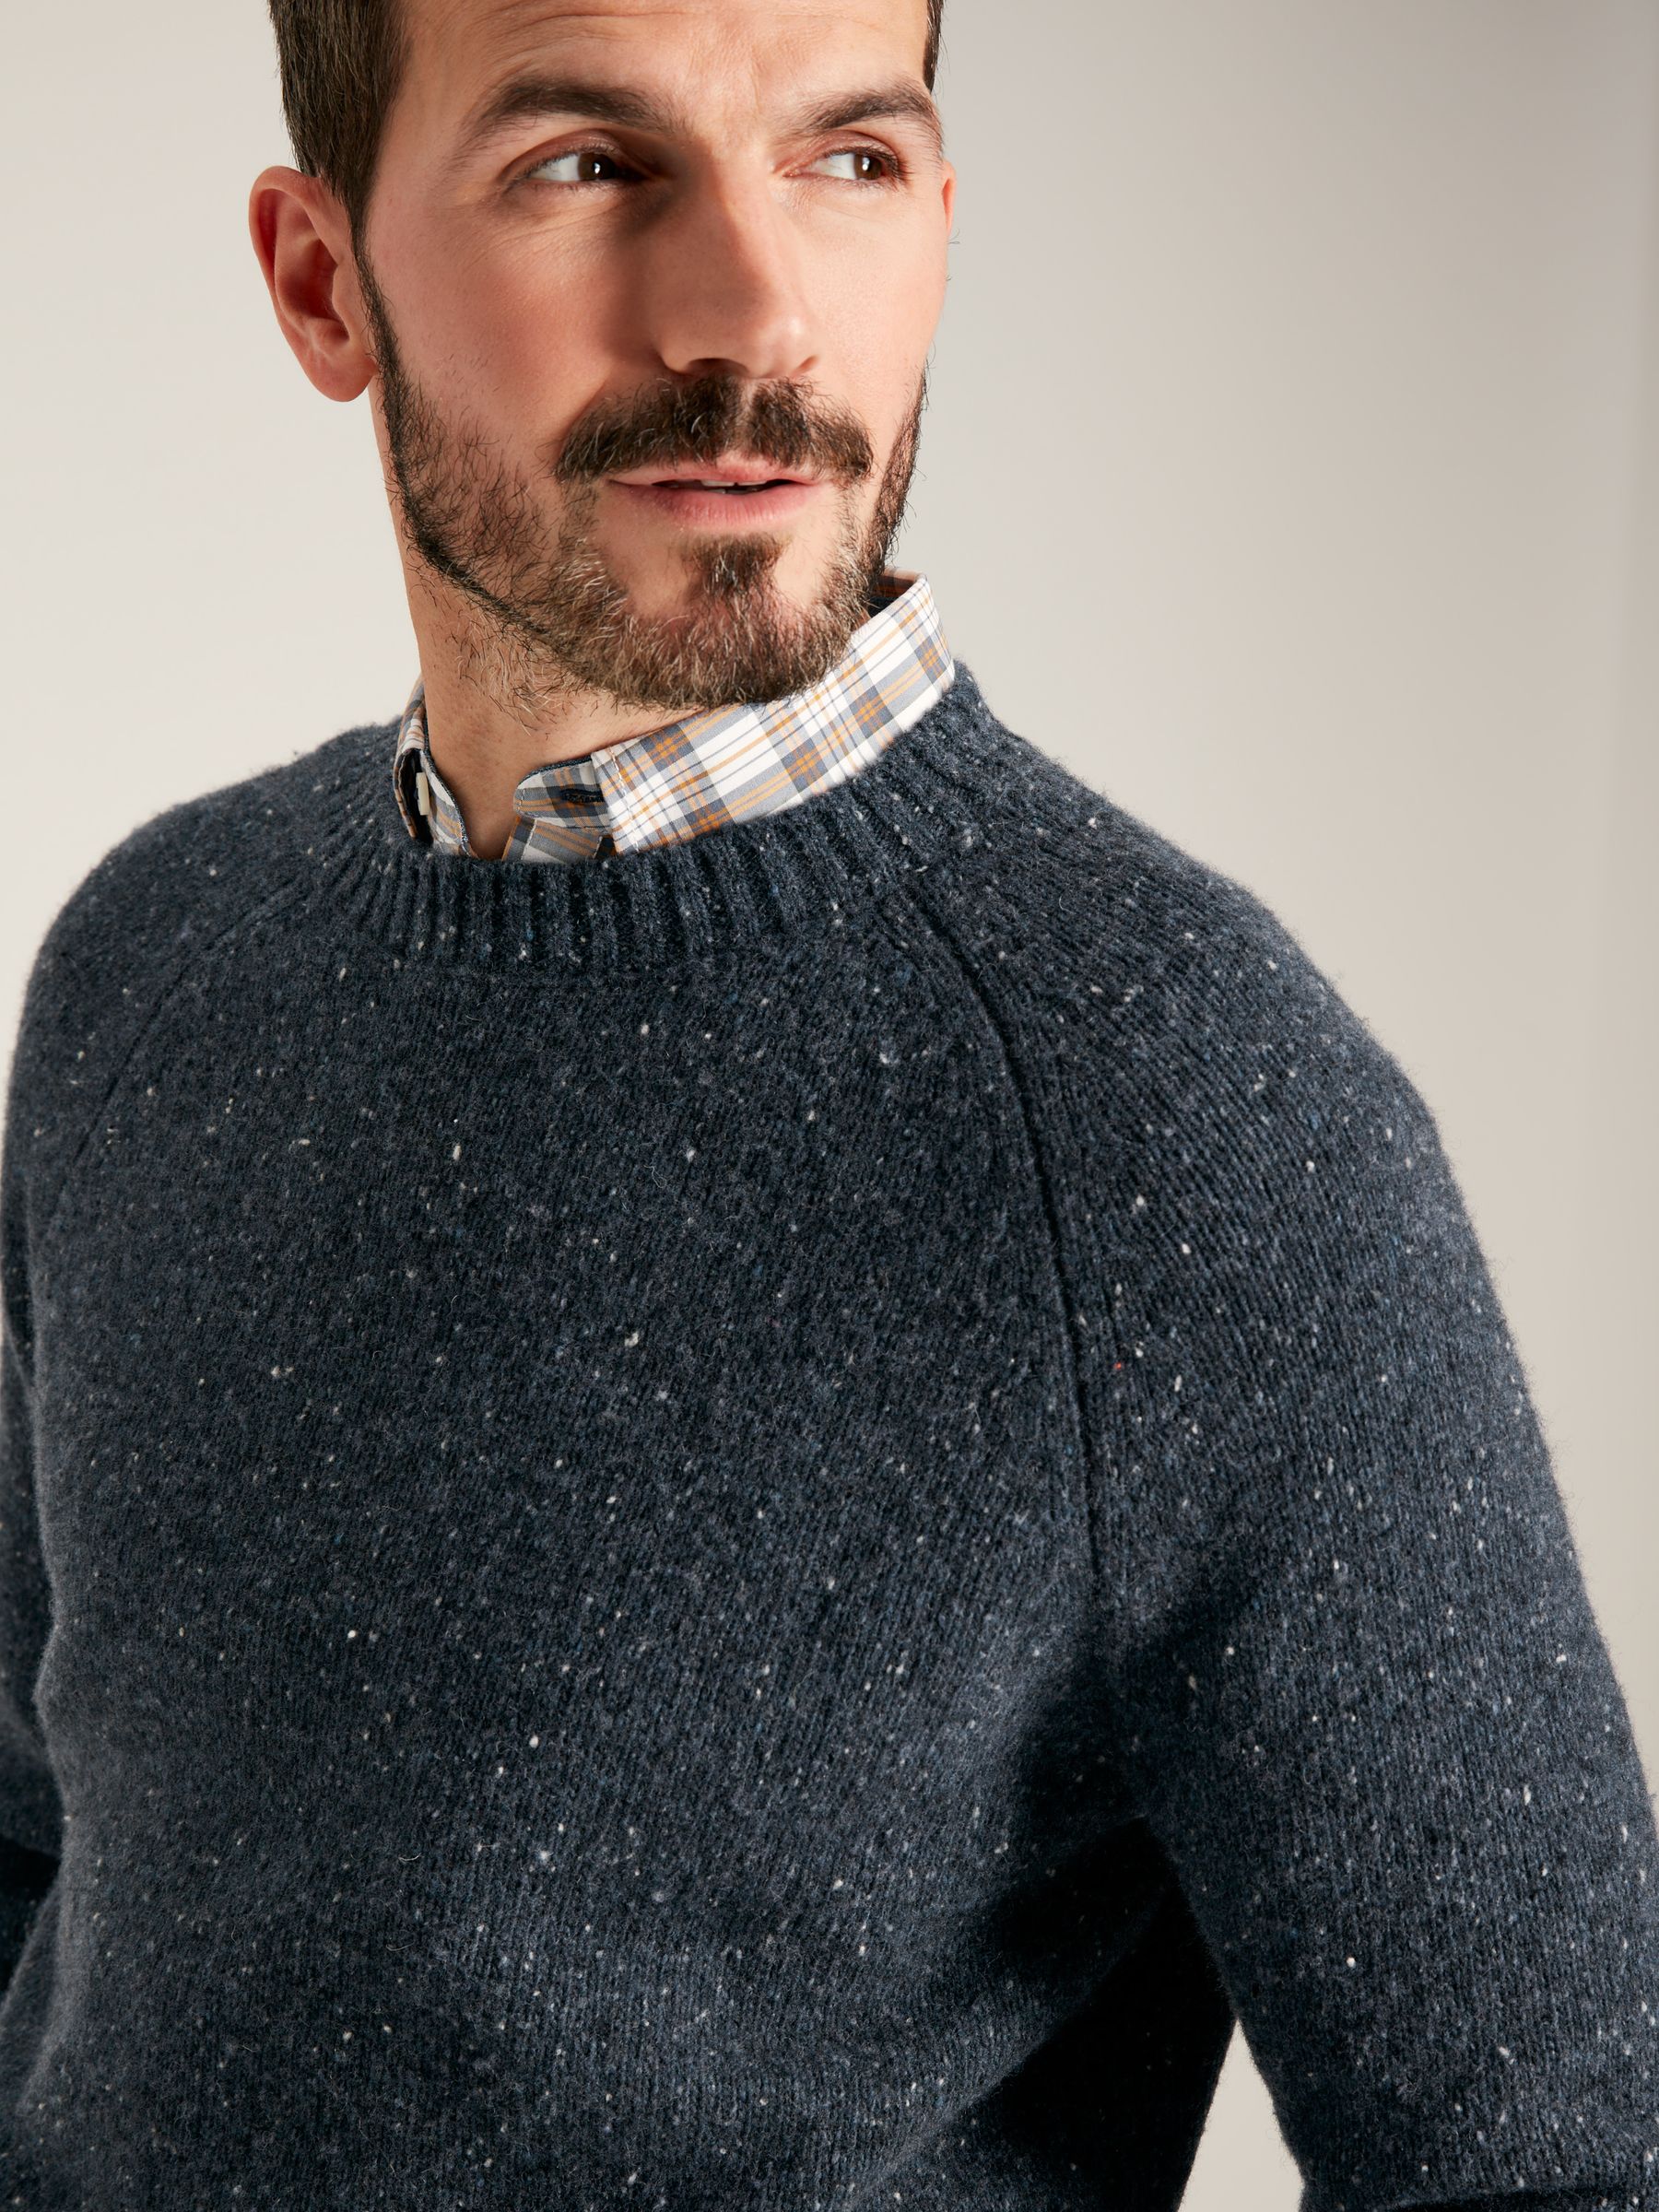 Buy Joules Glenbay Crew Neck Knitted Jumper from the Joules online shop